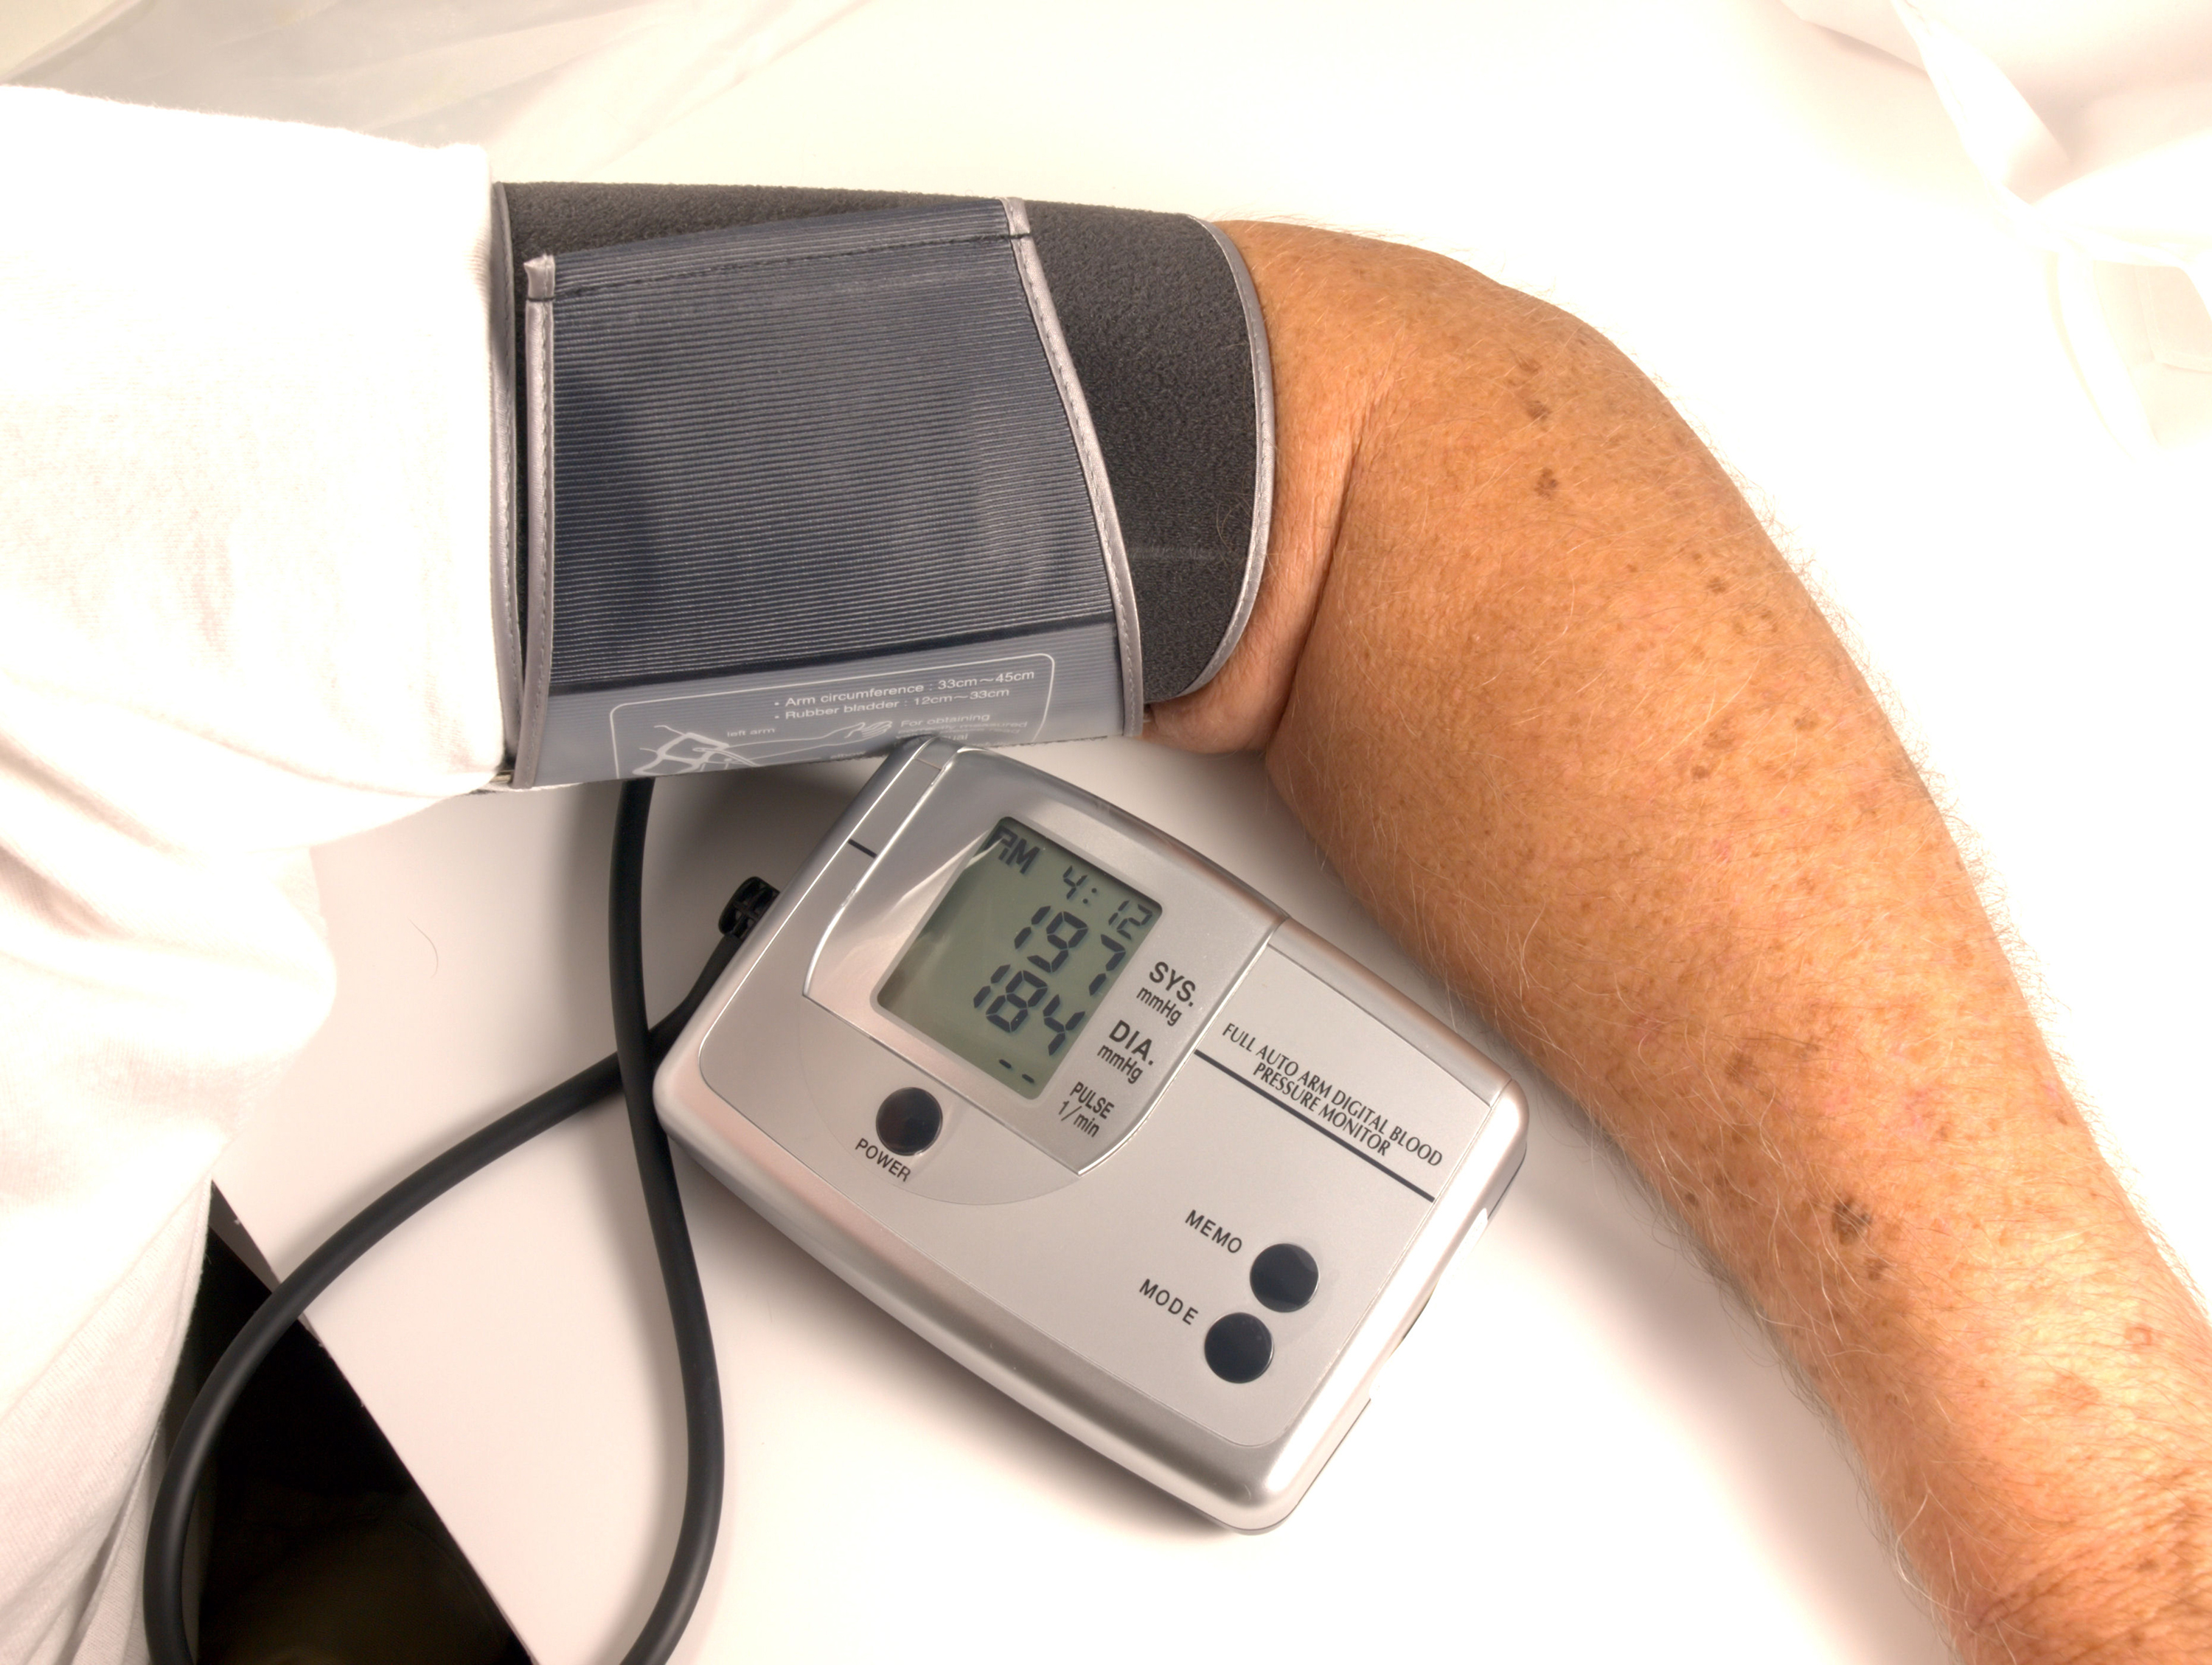 Is your home blood pressure monitor accurate? - Harvard Health